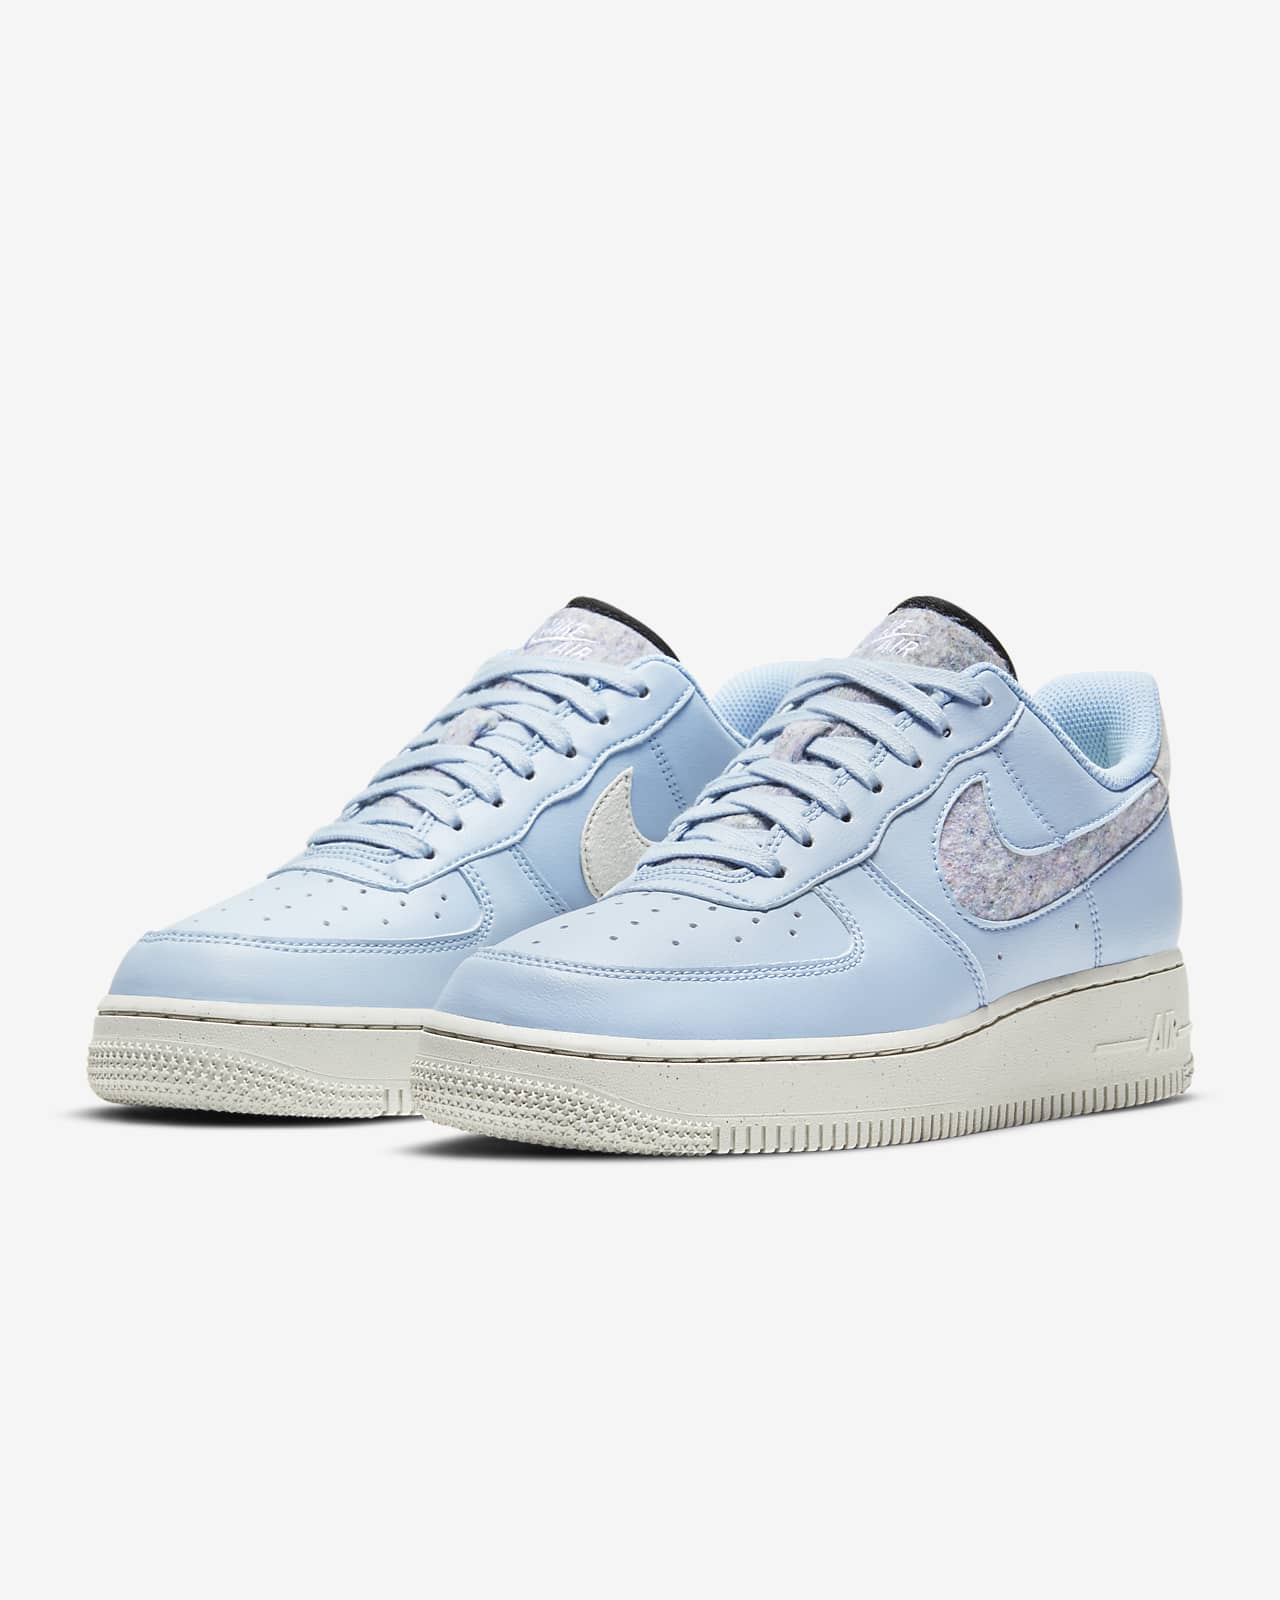 women's nike air force shoes